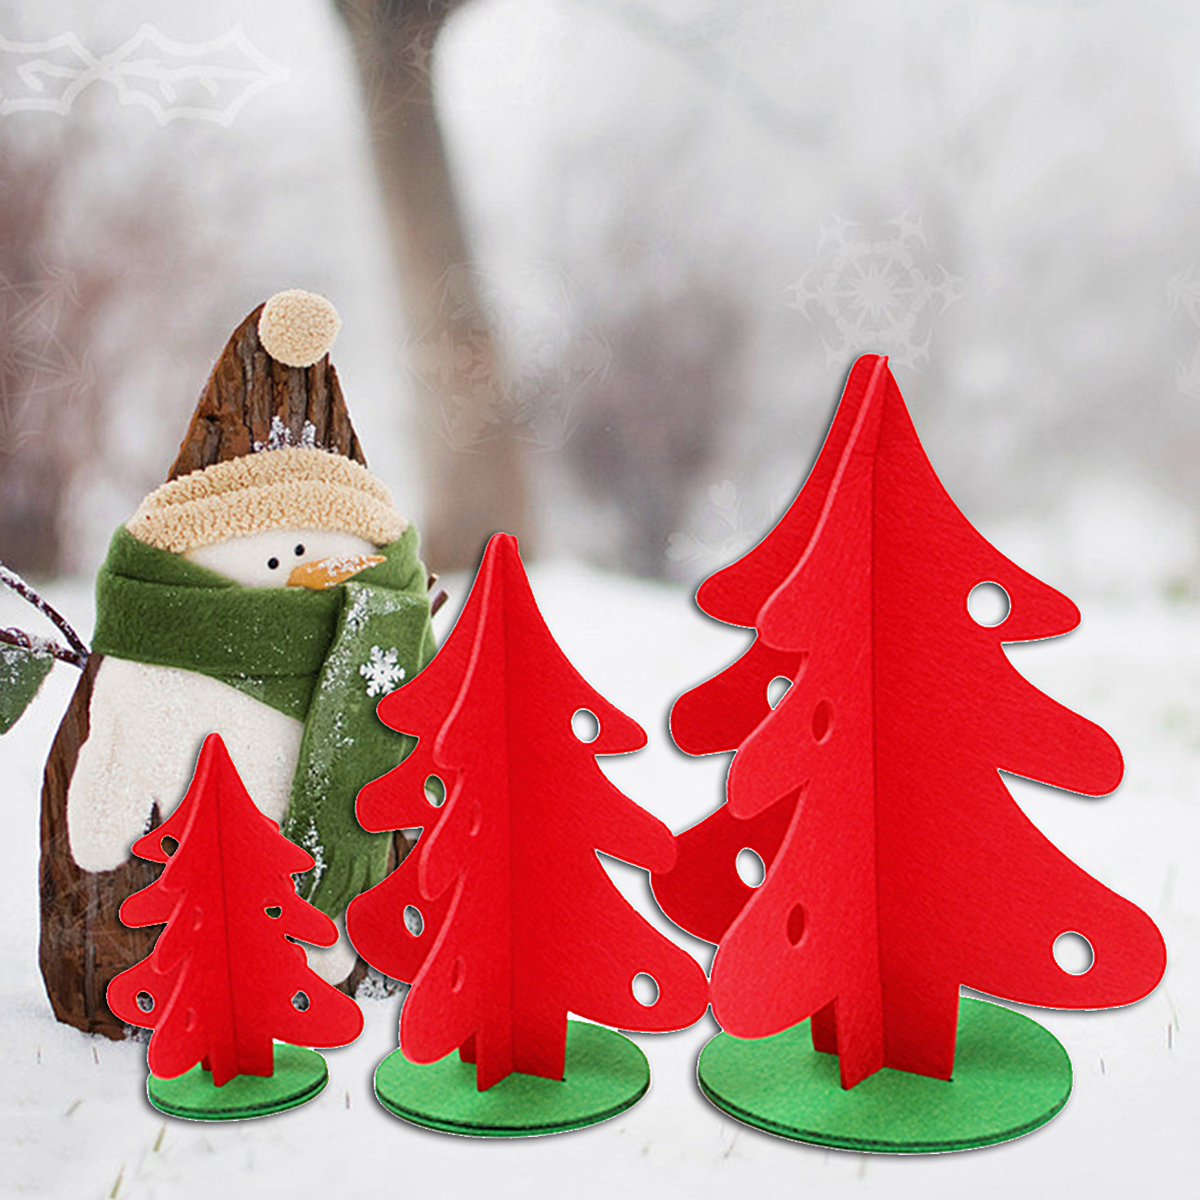 Vintage-Christmas-Tree-Home-Shop-Ornament-Decoration-Fabric-Red-Green-Tree-1103573-1